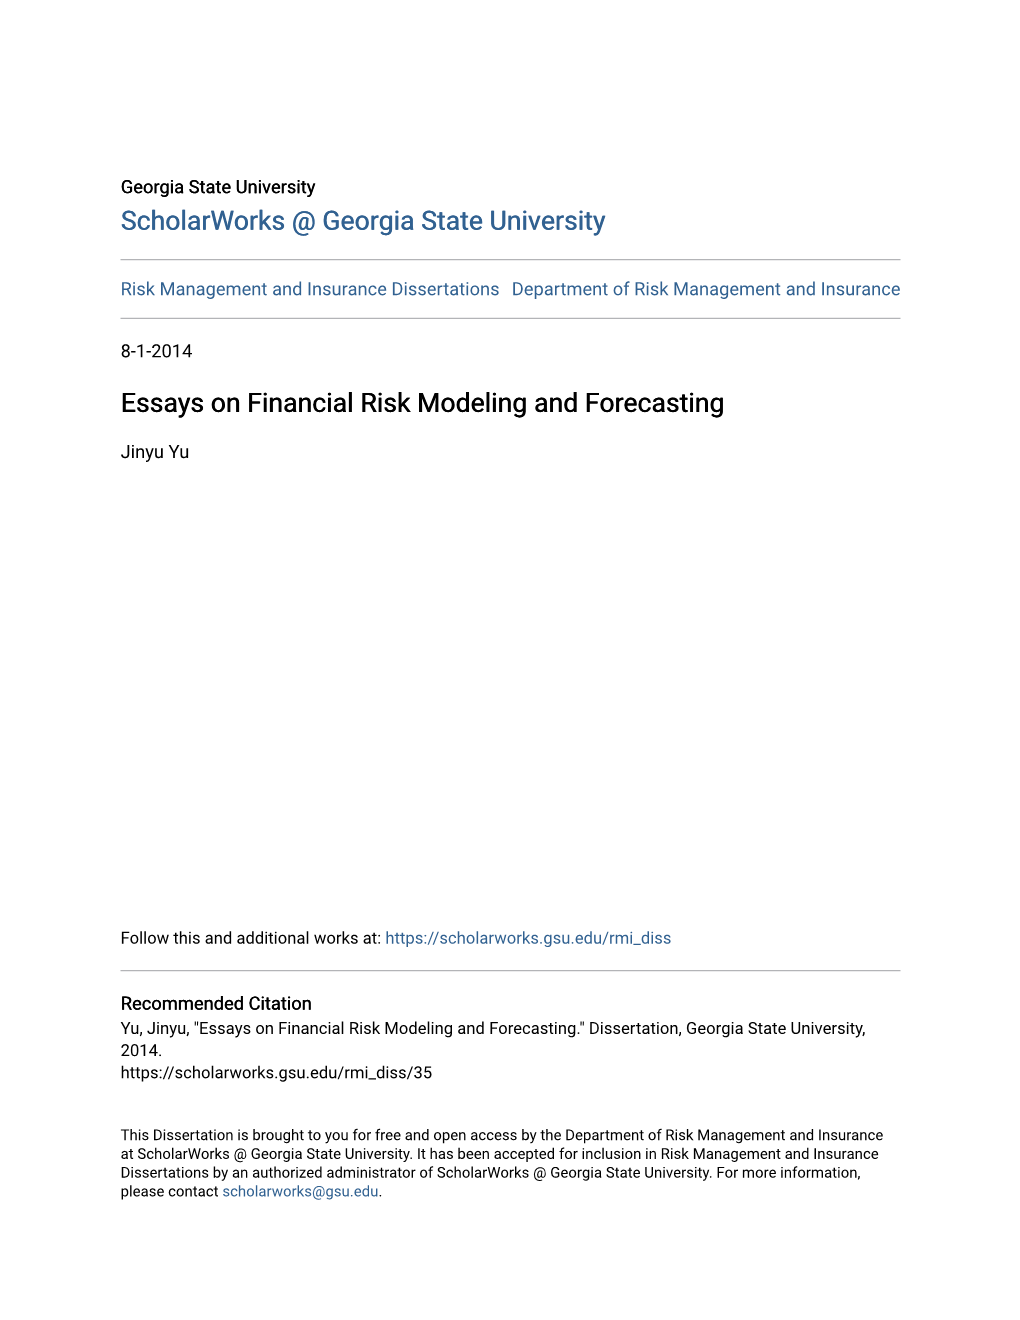 Essays on Financial Risk Modeling and Forecasting